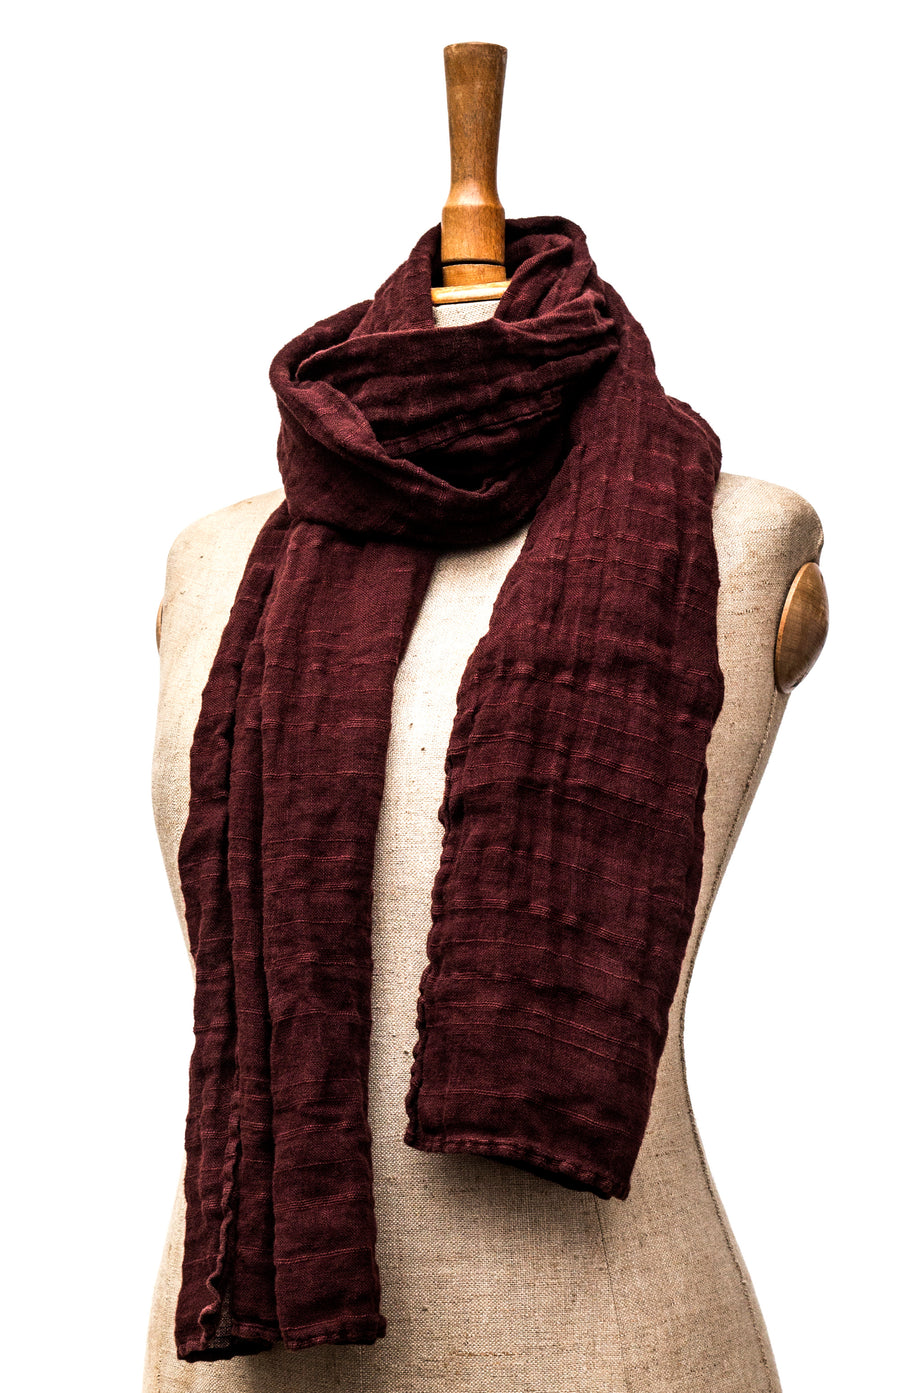 Luxuriously soft linen scarf in the shade Rum Raisin